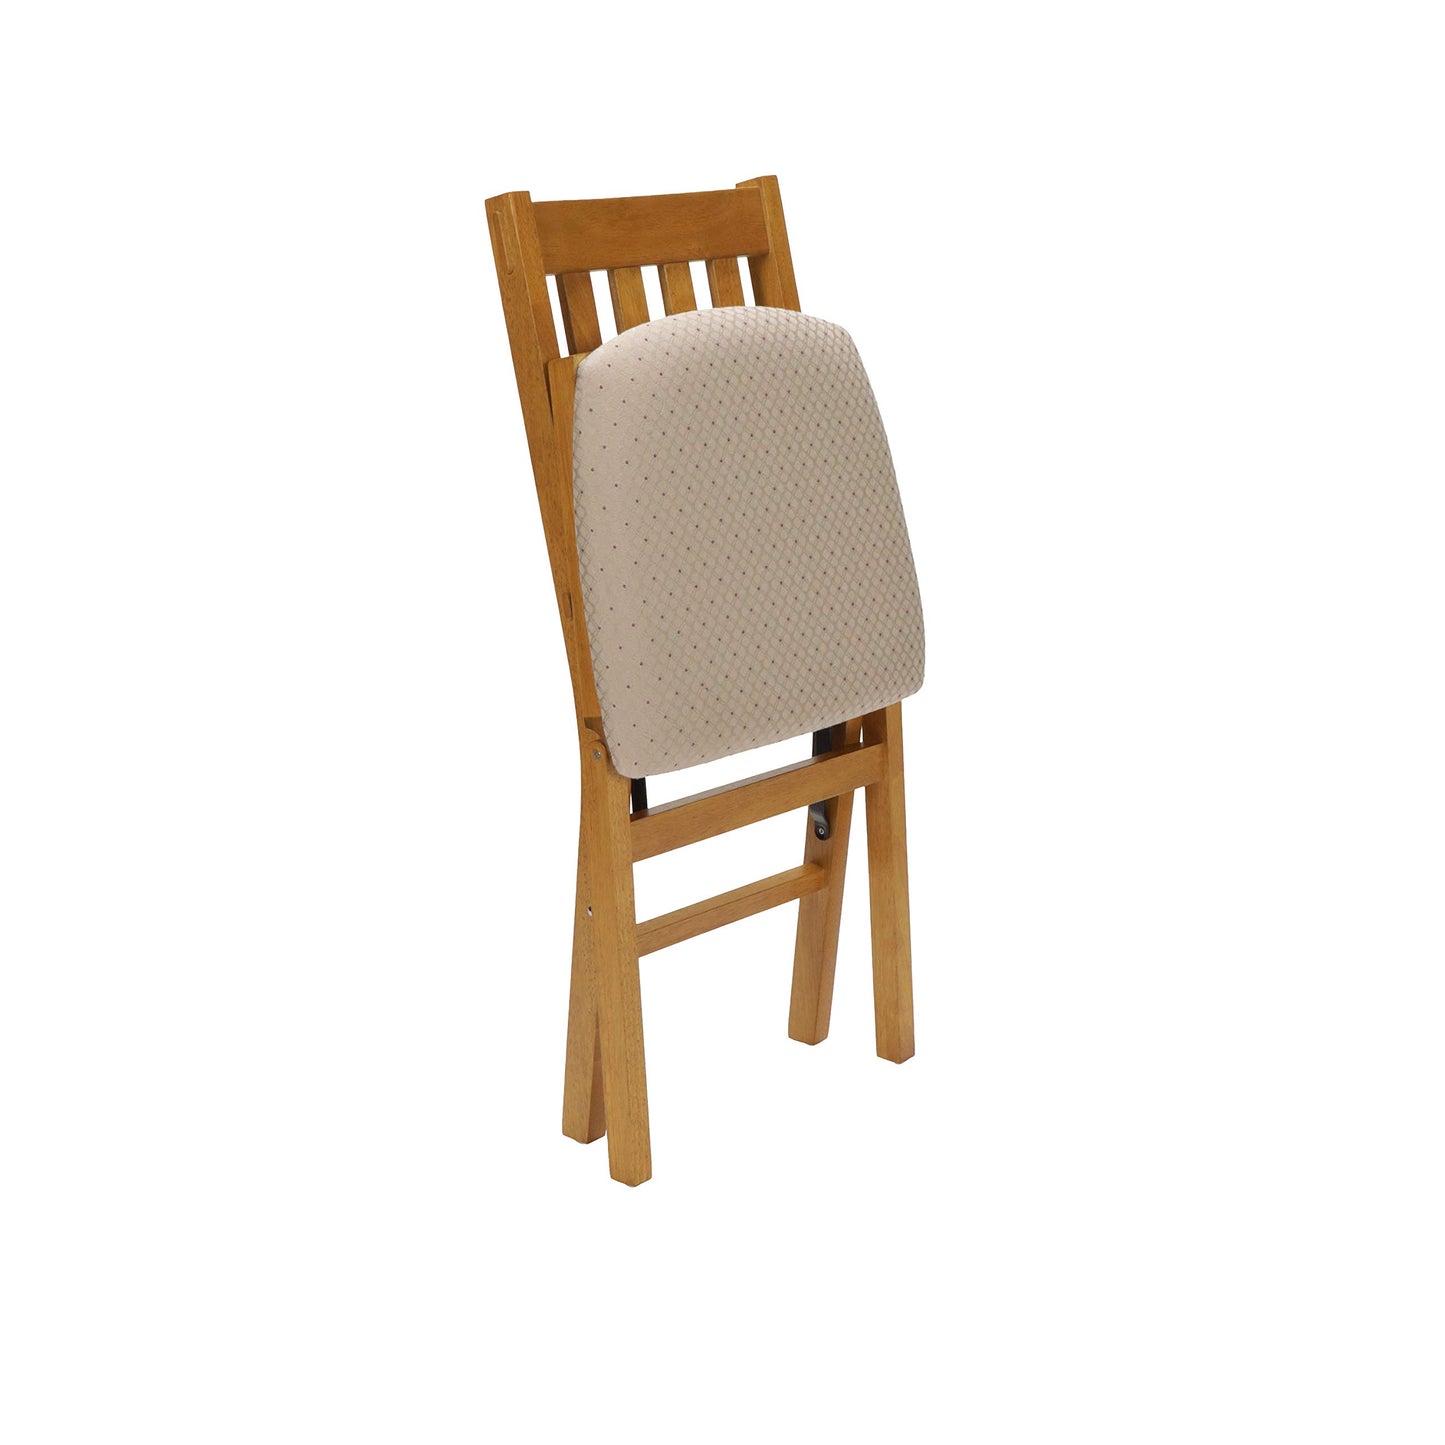 Meco STAKMORE Arts and Craft Folding Chair Oak Finish, Set of 2, Wood